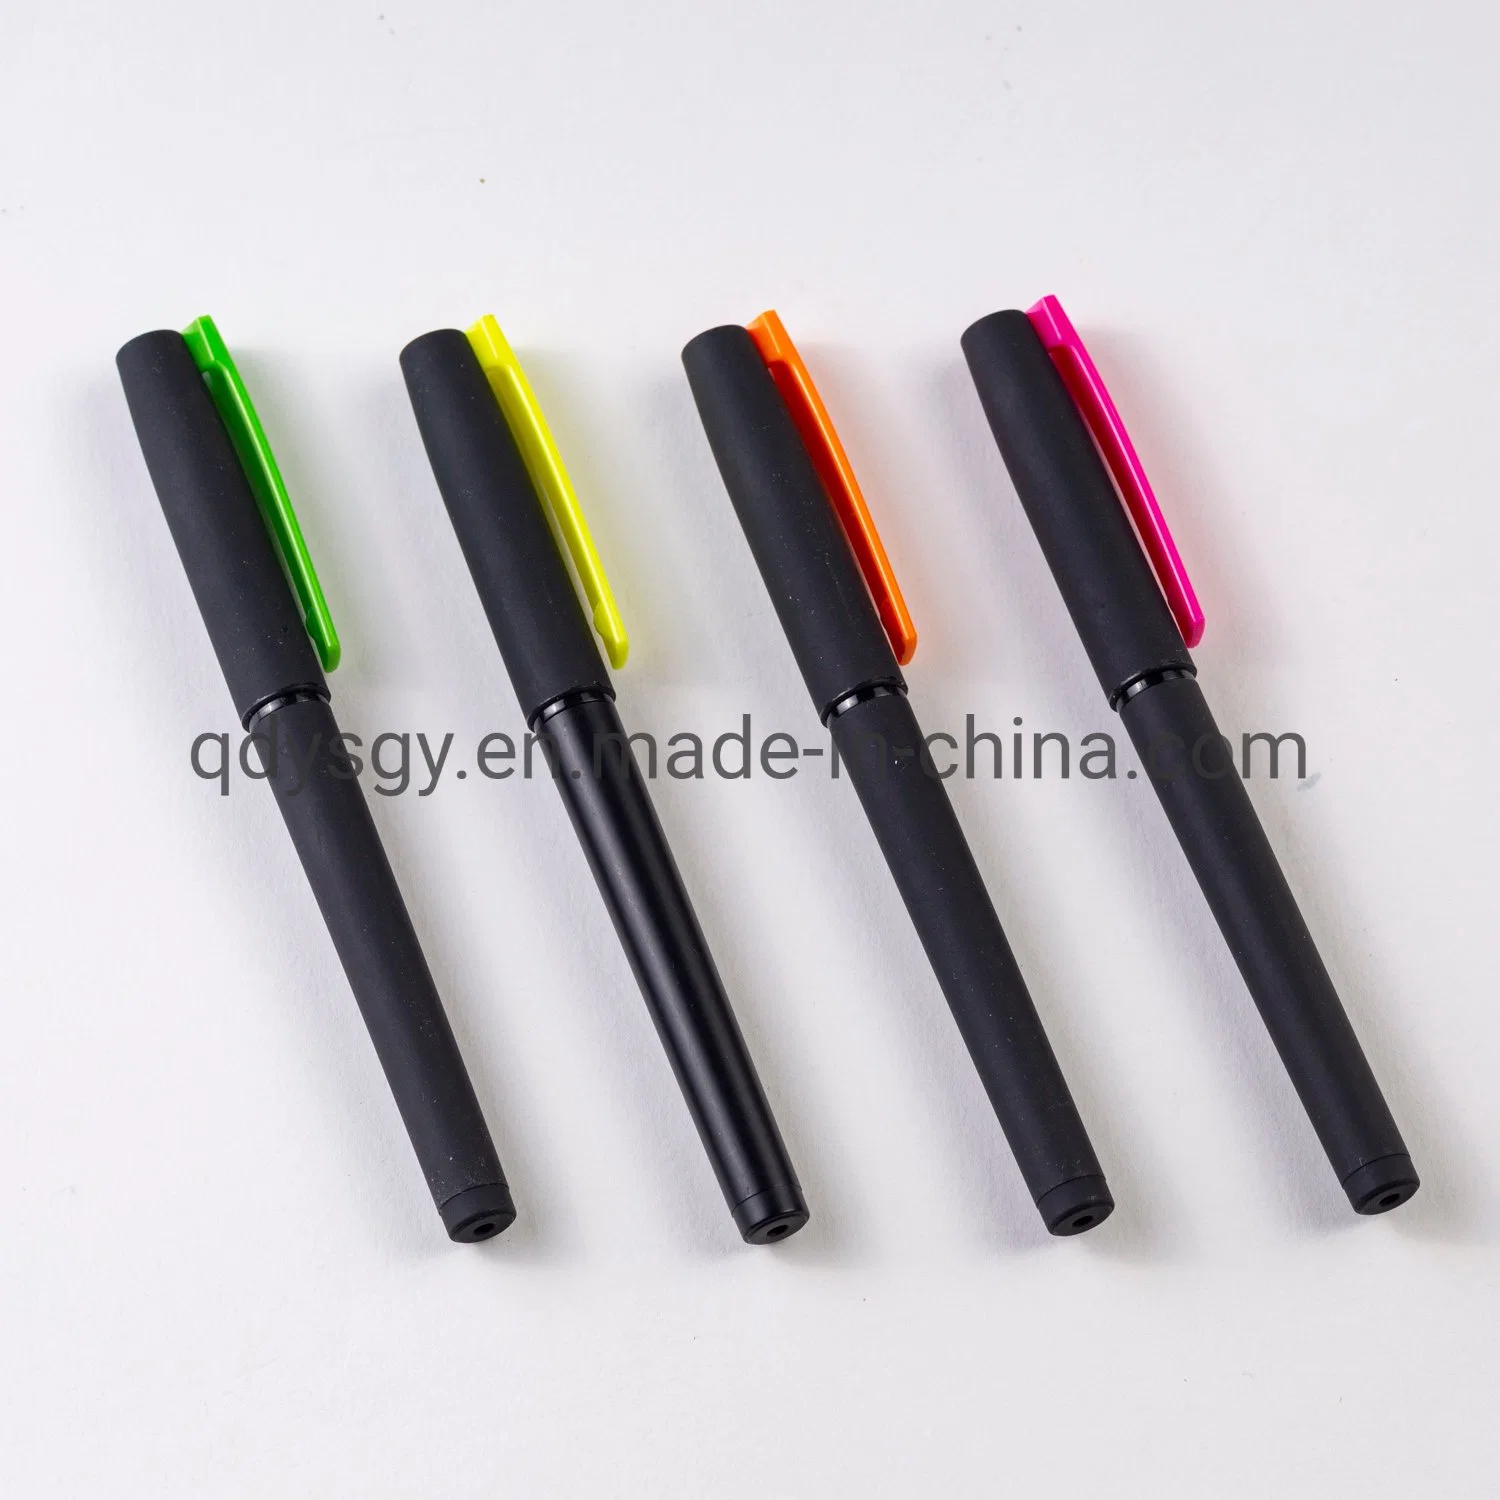 Stationery with High-Quality Gel Pen